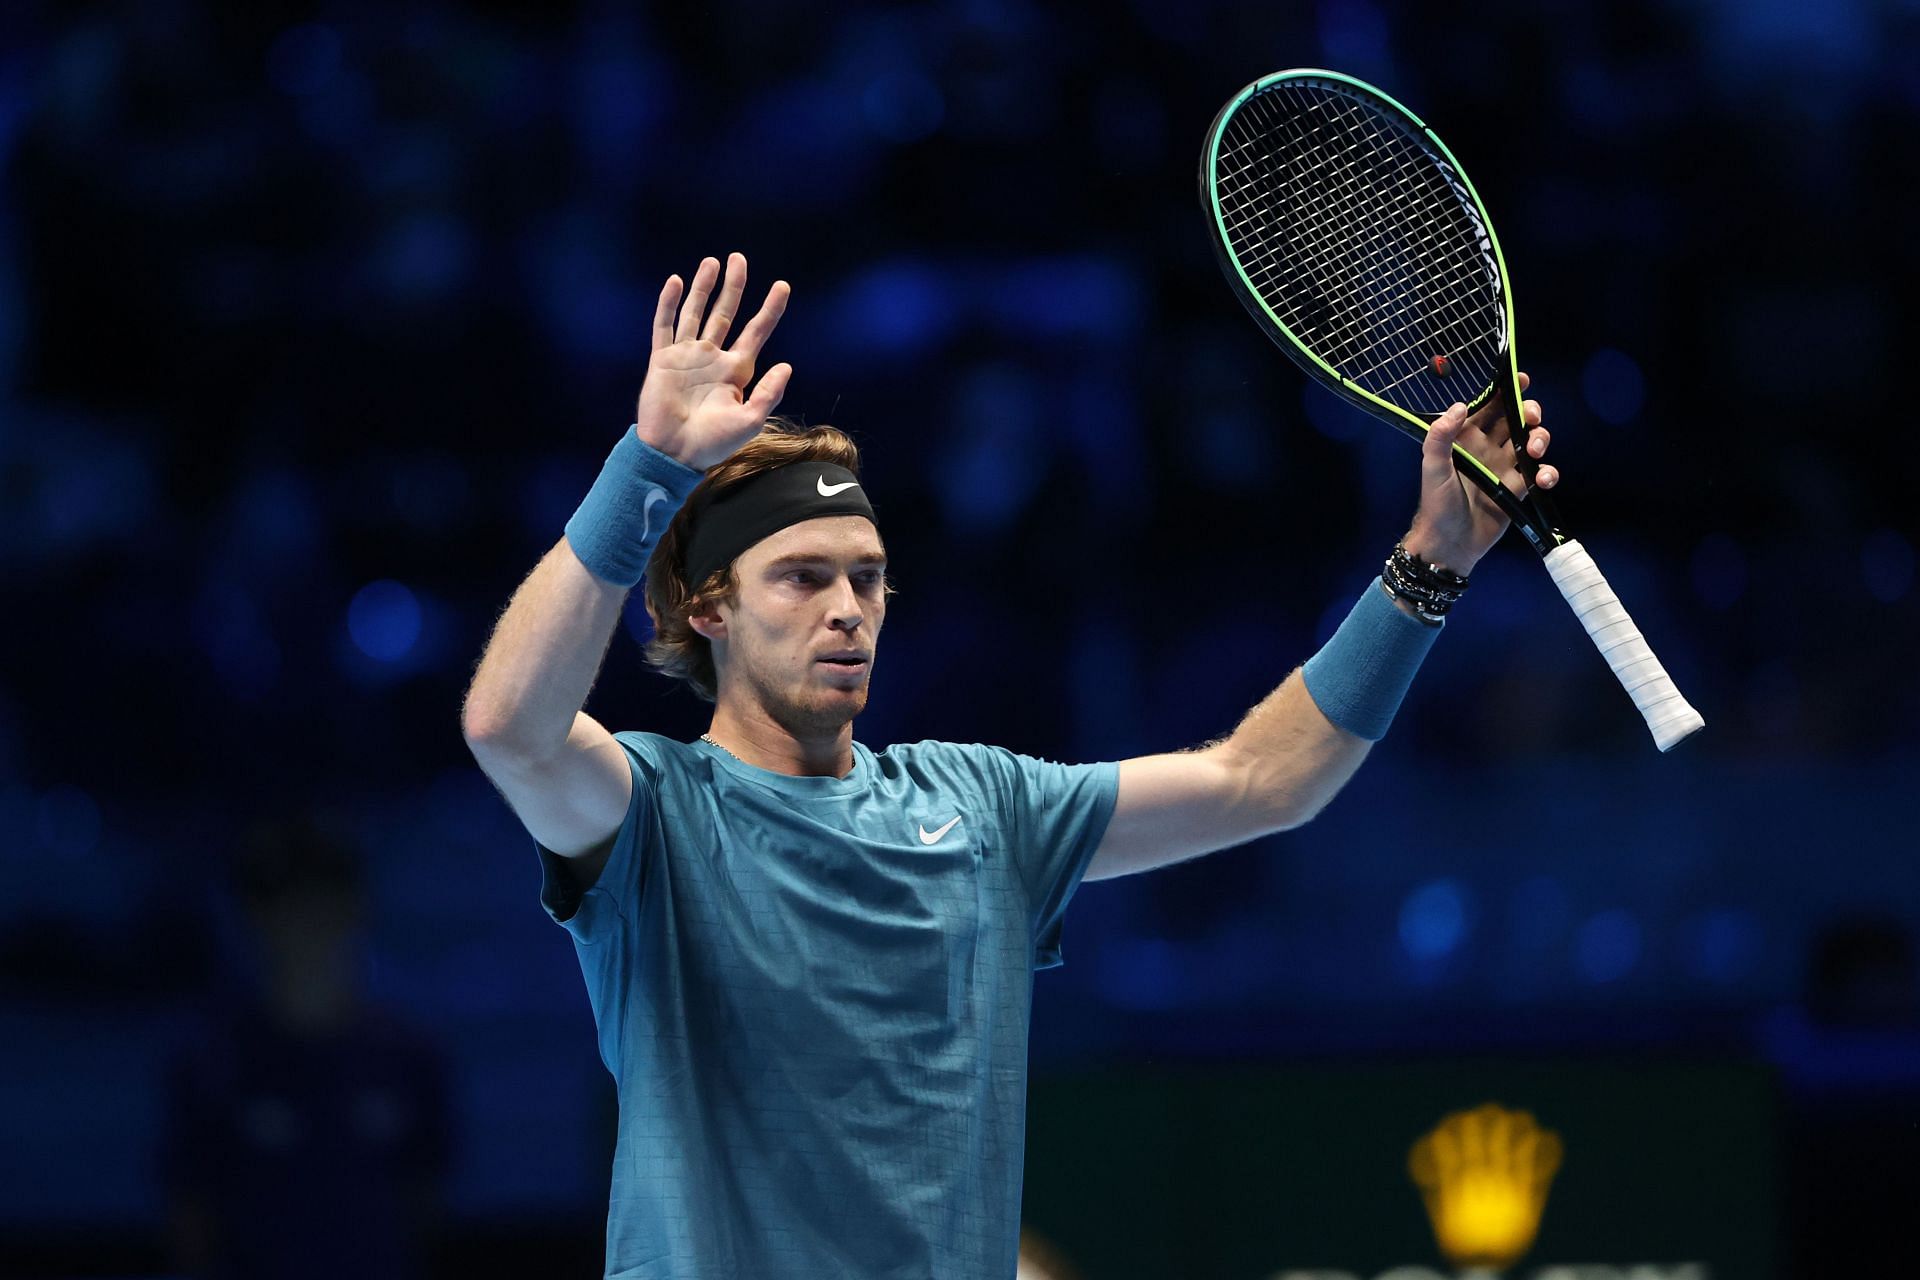 Andrey Rublev at the Nitto ATP World Tour Finals